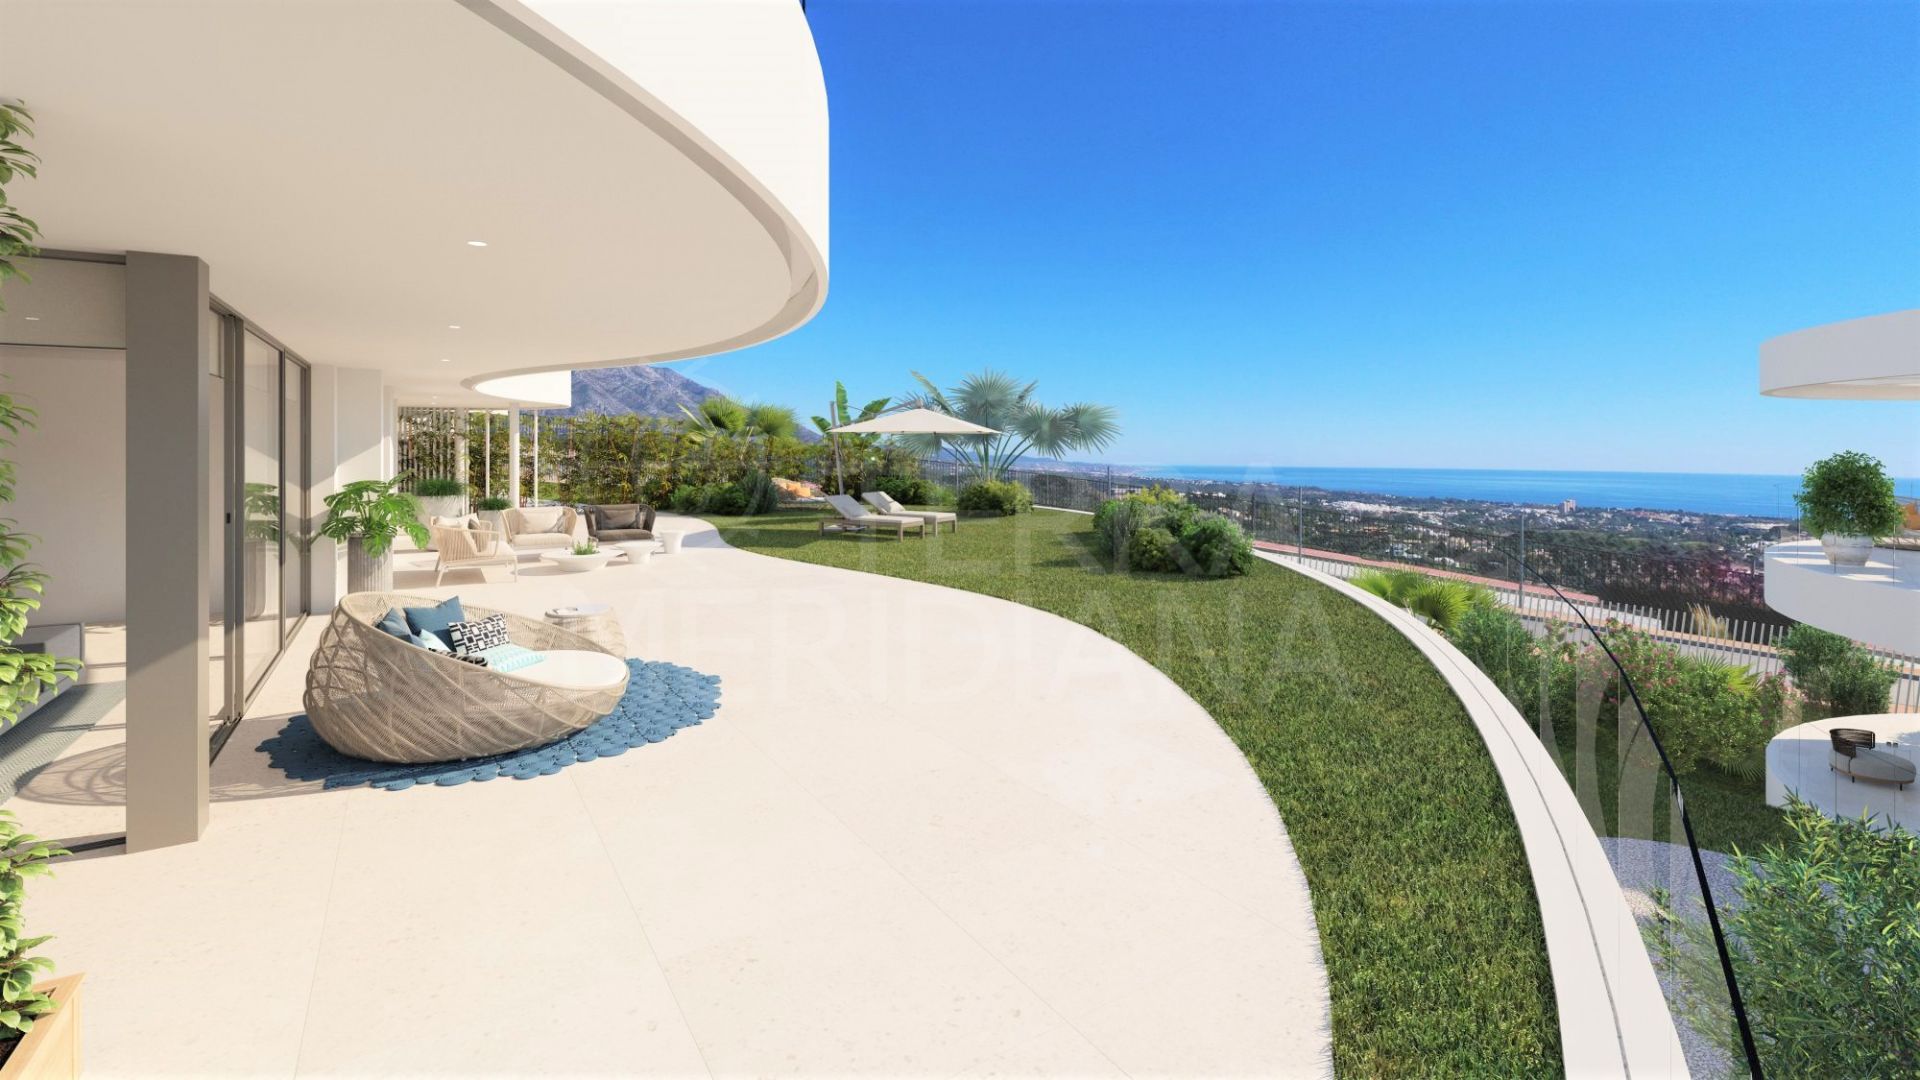 Off-plan 2 bedroom ground floor apartment for sale in architectural chic The View Marbella, Benahavis